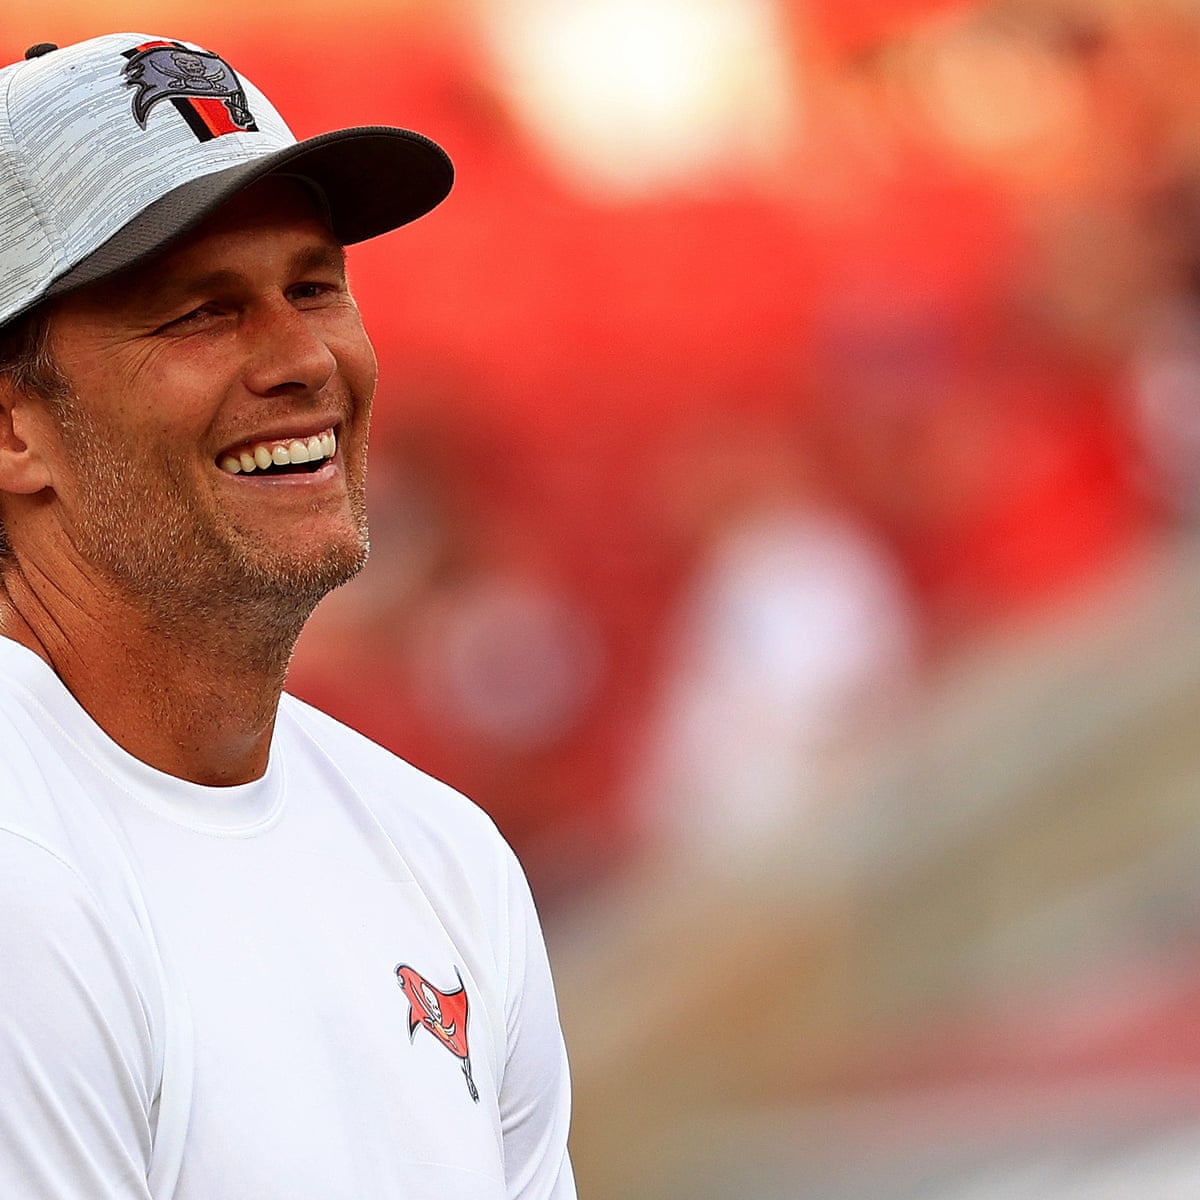 Tom Brady is joining the Tampa Bay Buccaneers, allowing us to bask in his  mortality